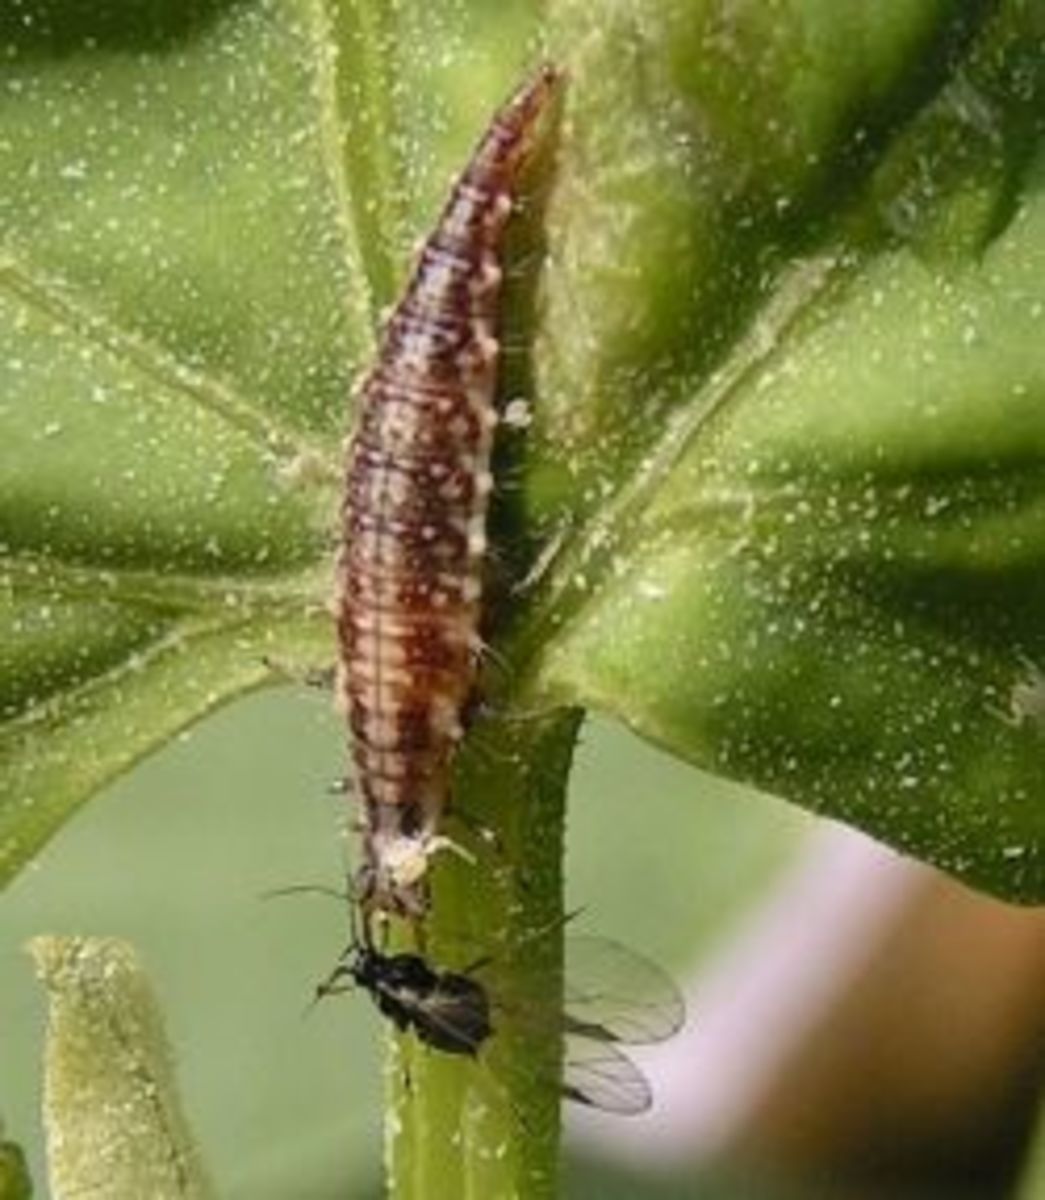 Green lacewing larva eating an aphid.